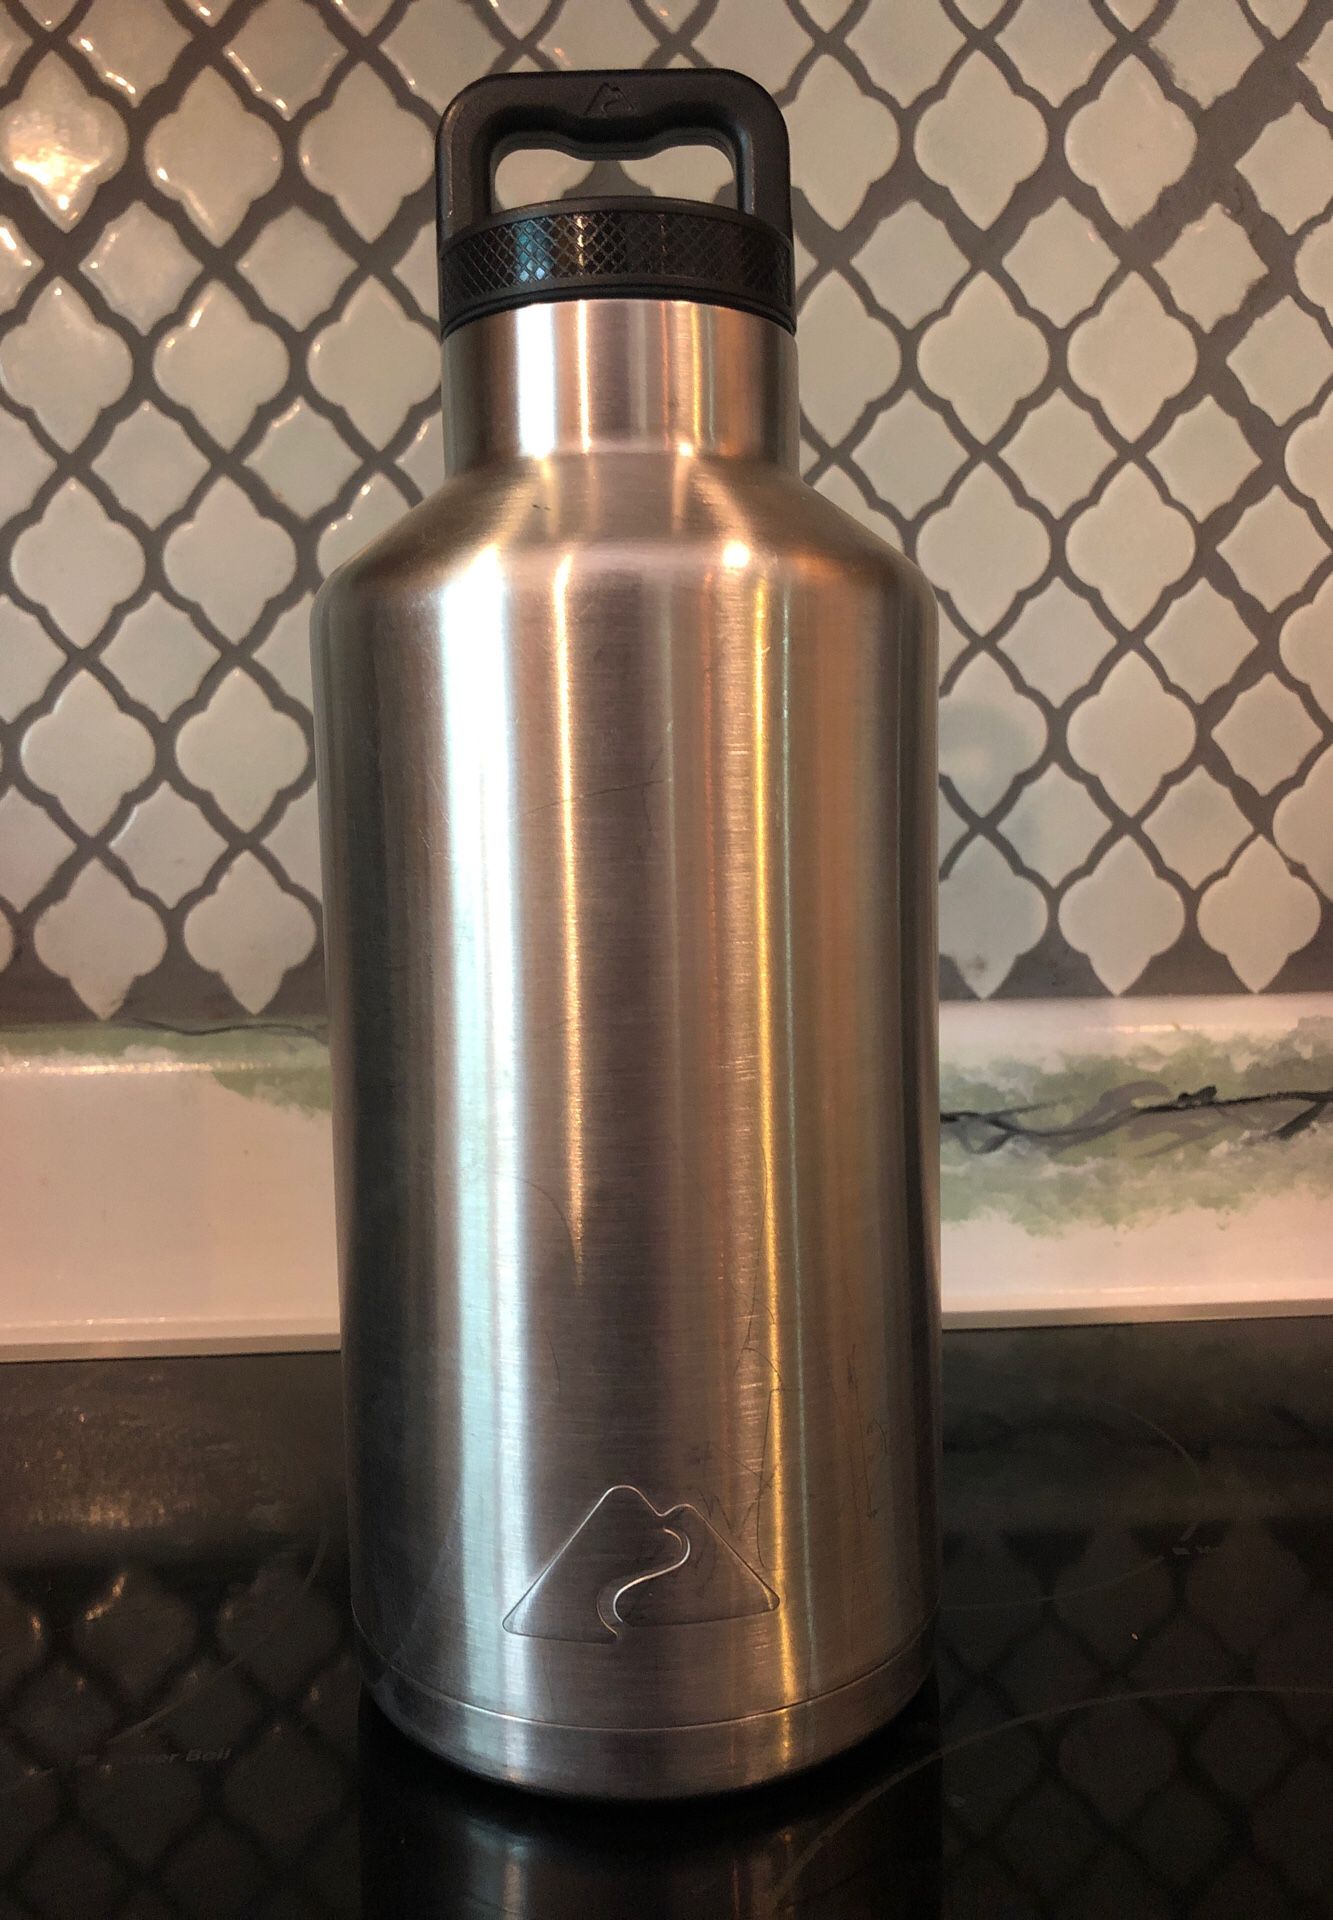 Large insulated stainless steel beverage container